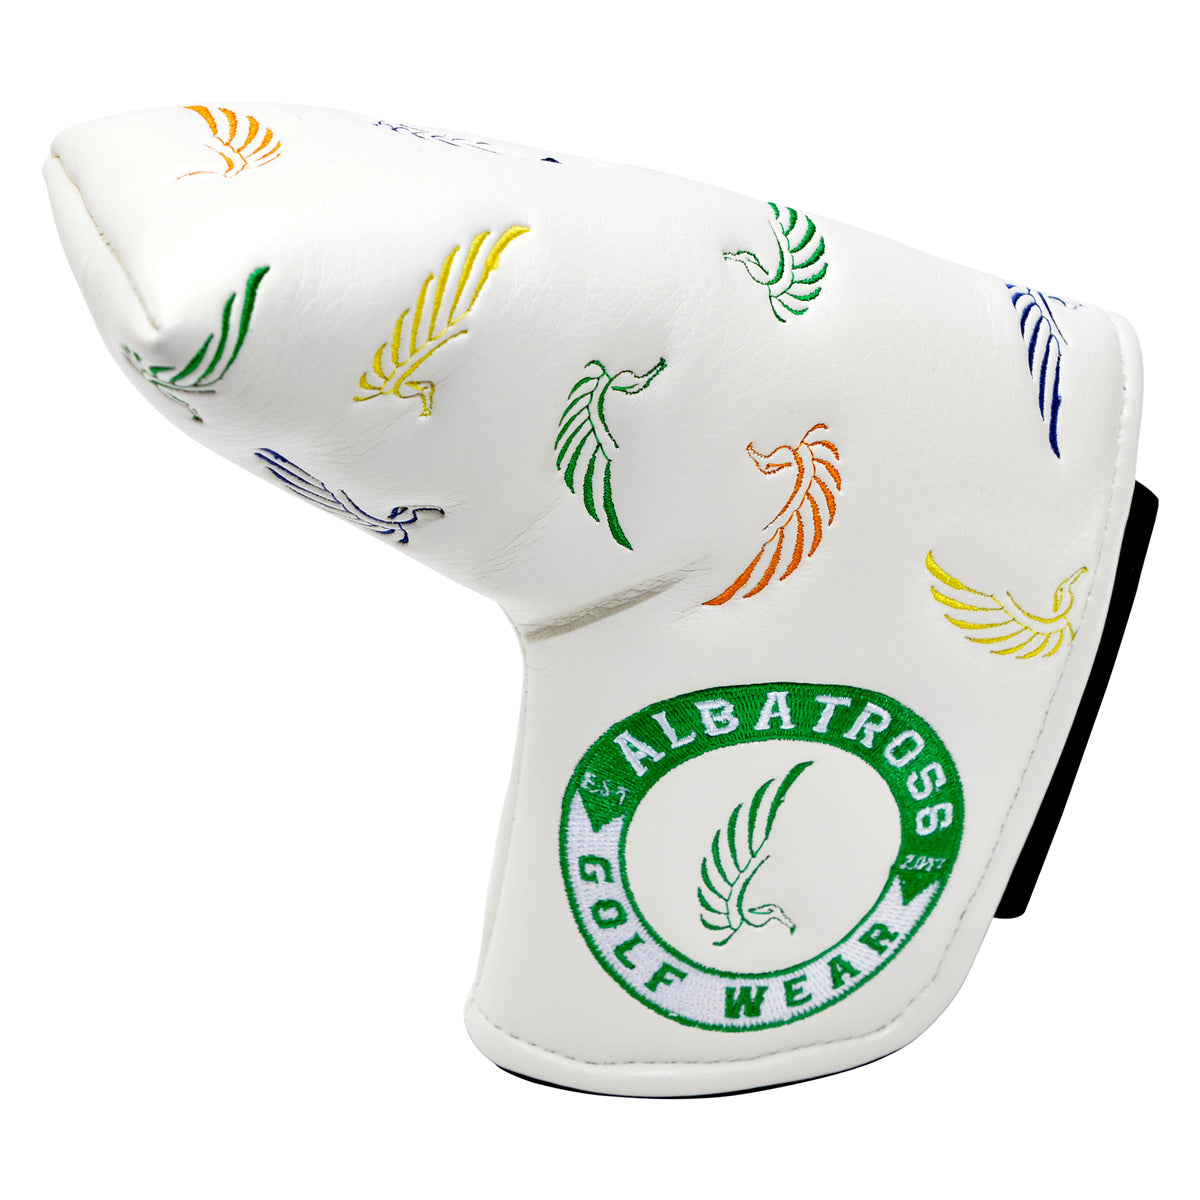 Albatros Golf Head Covers S00 - Sport and Lifestyle